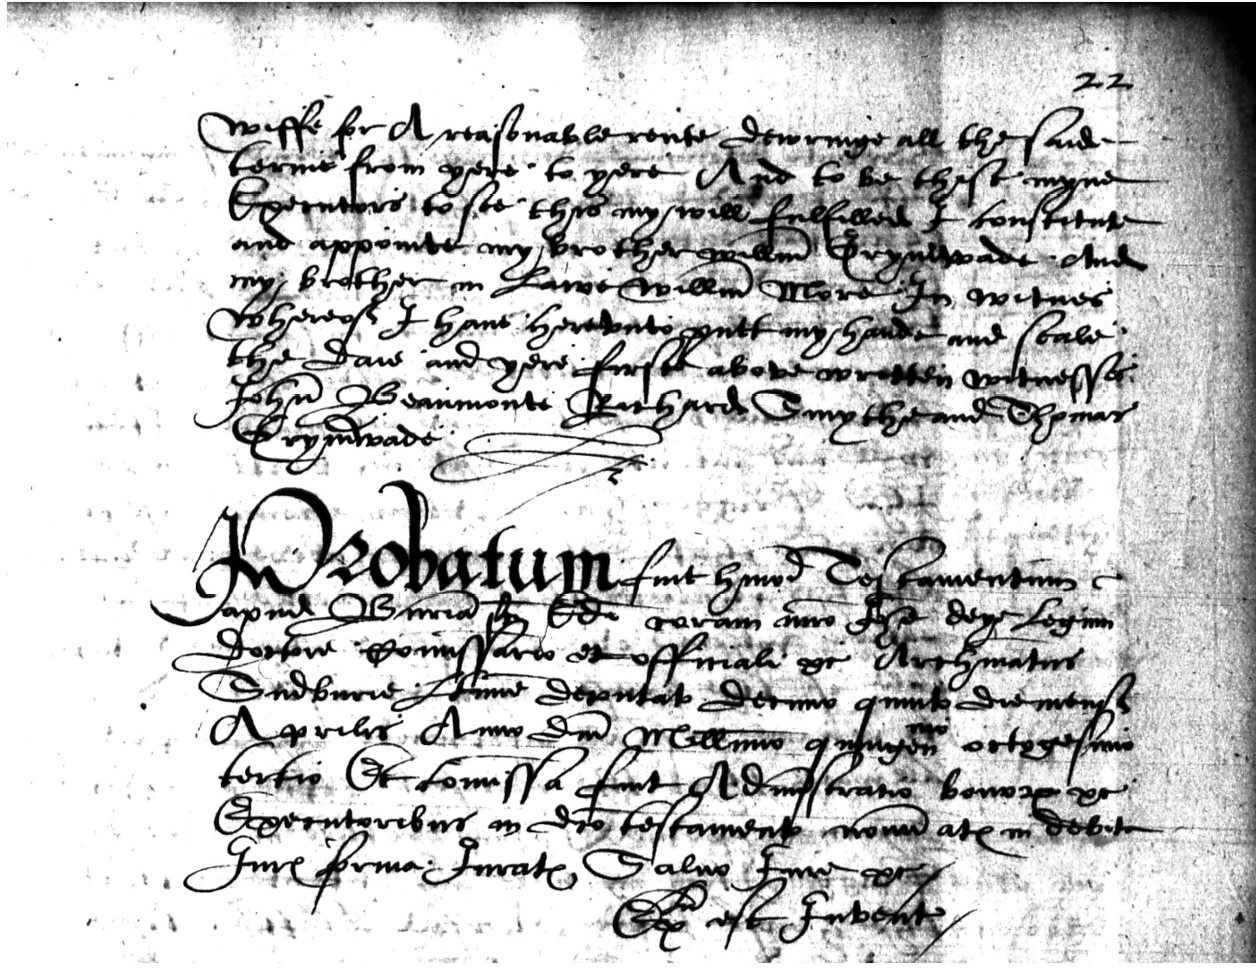 Will of Edmunde Grymwade, page 3